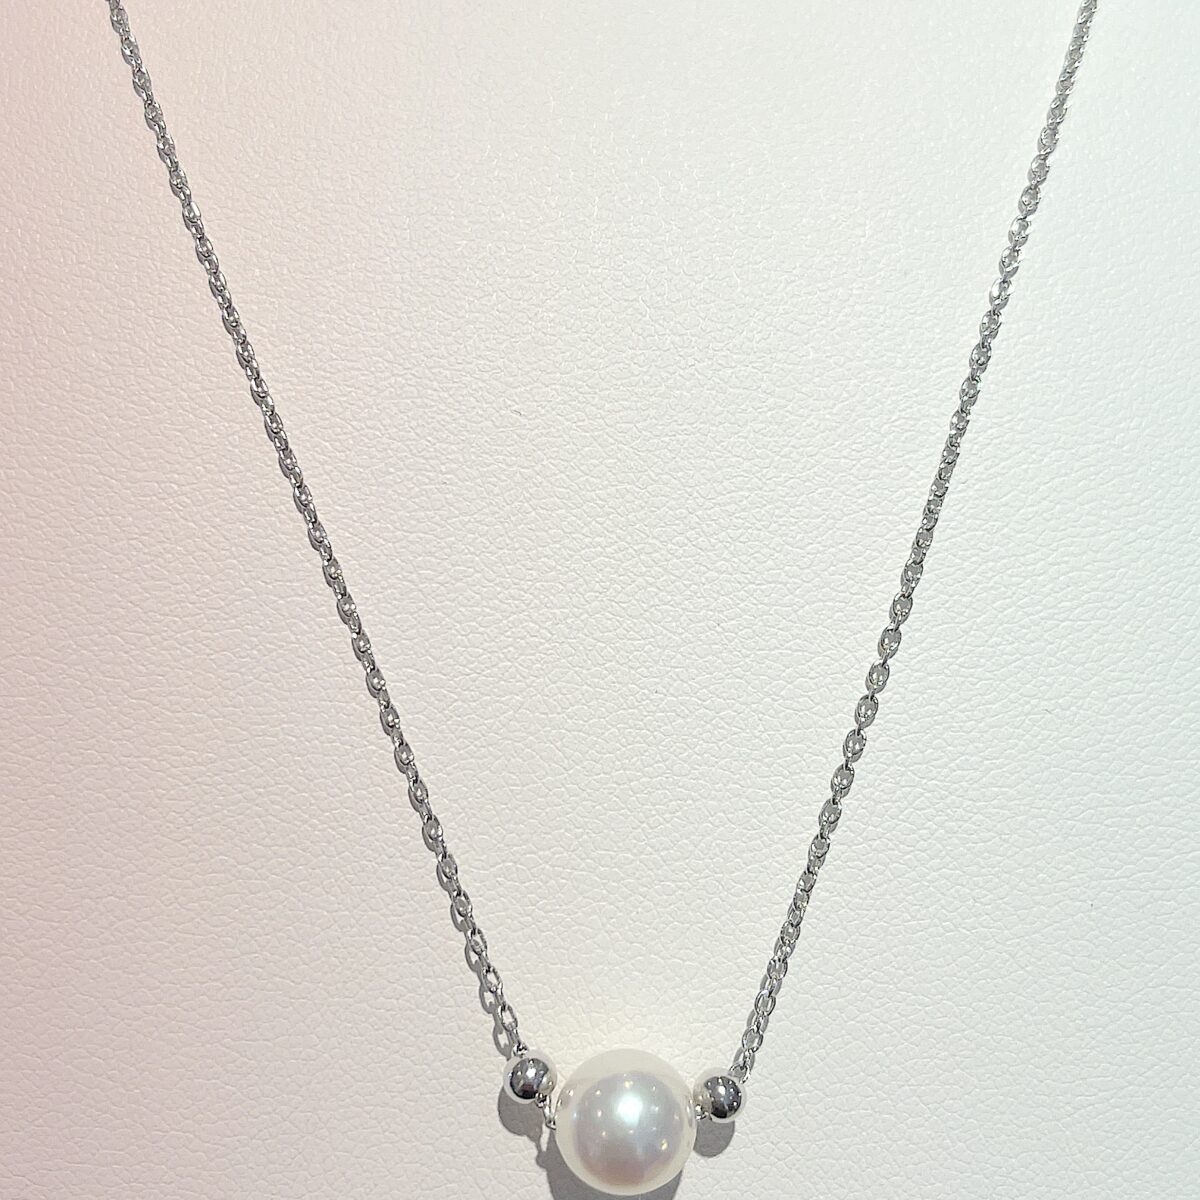 Japanese akoya pearl Archives - Melbourne Pearls